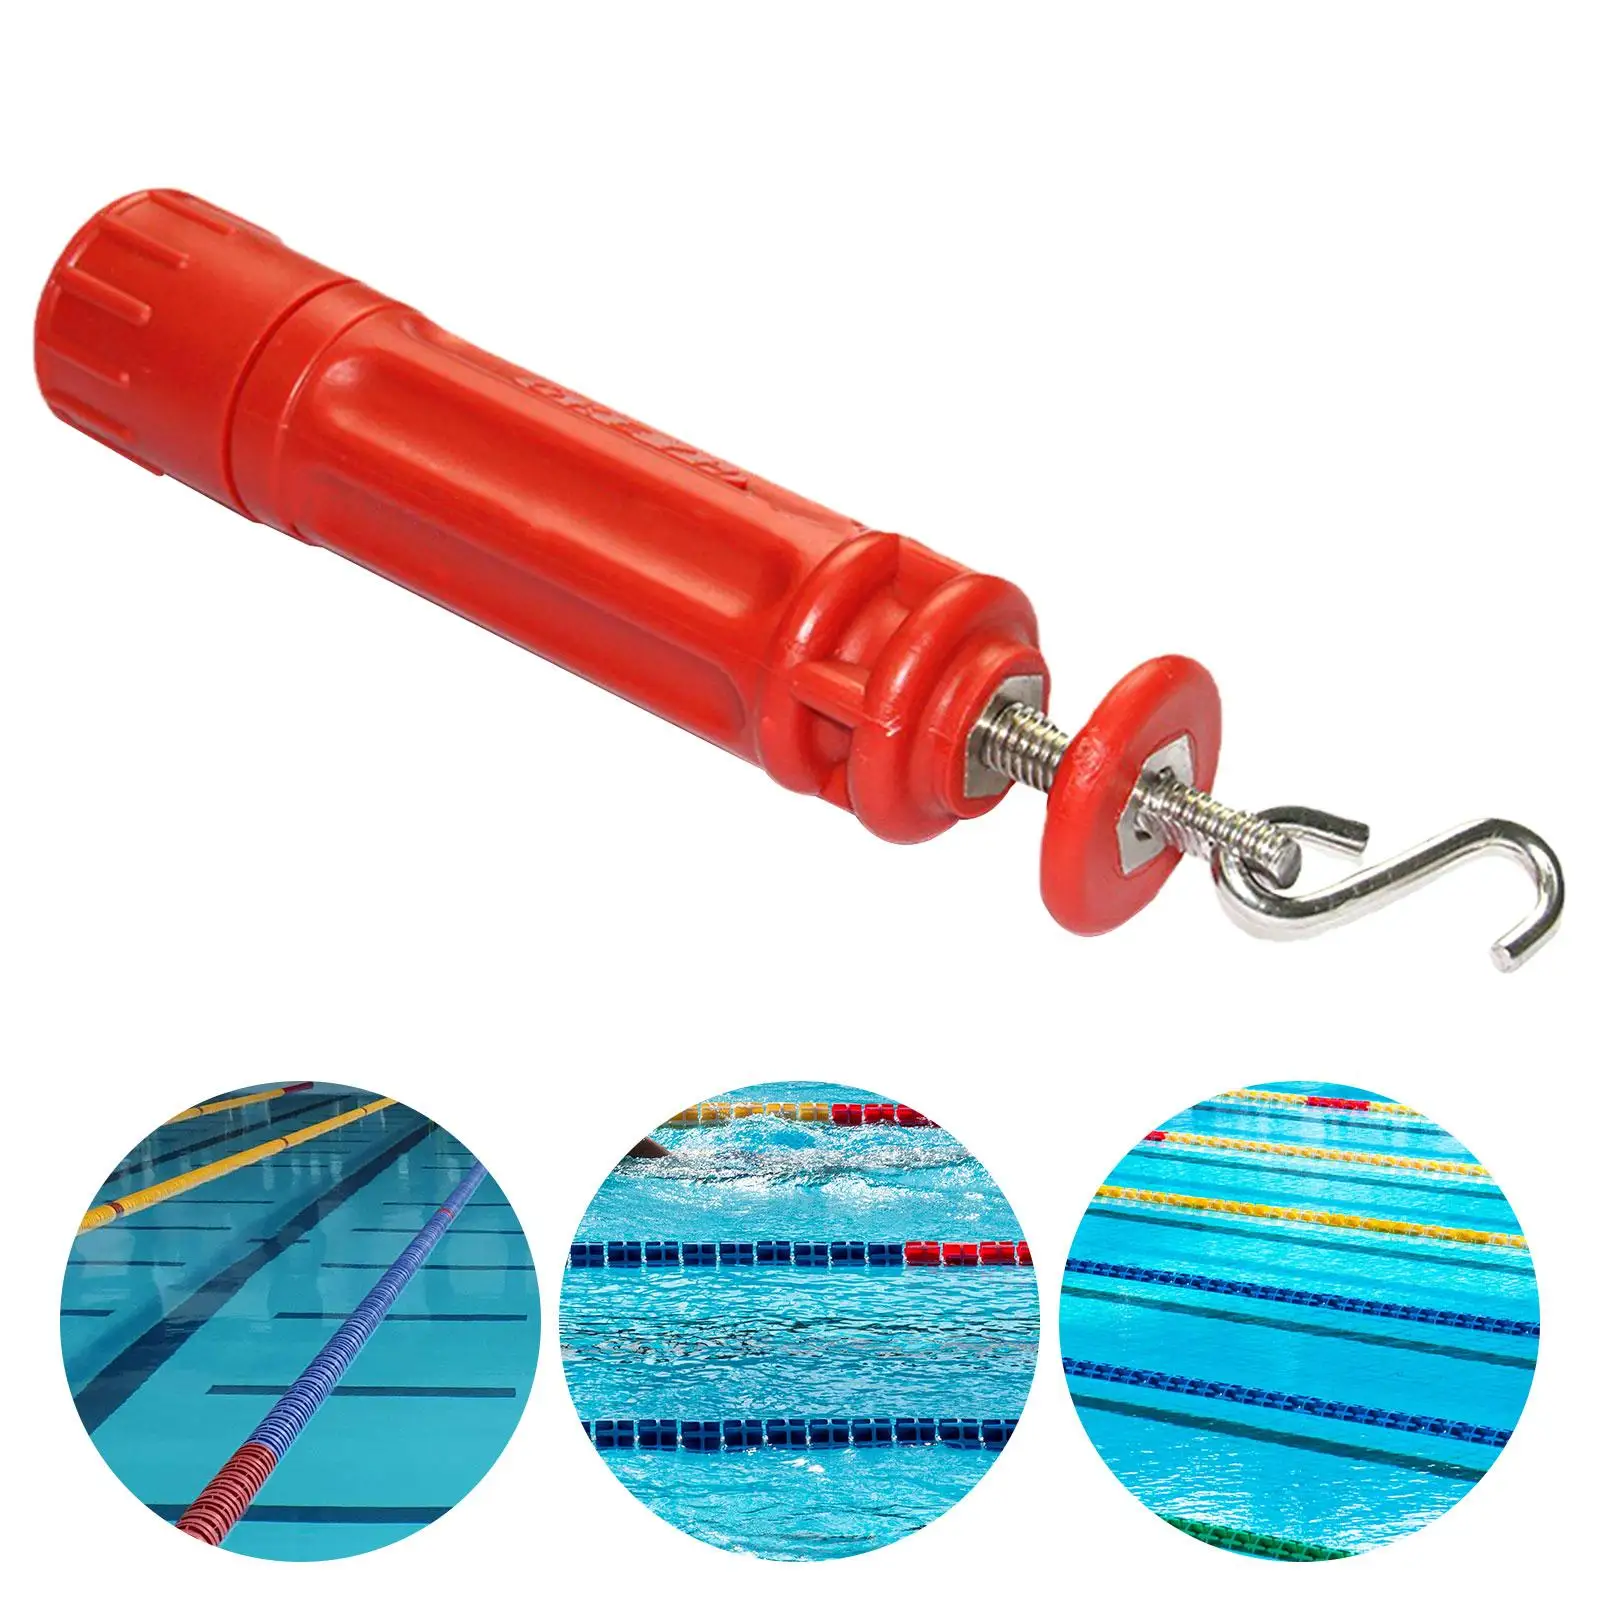 

Lane Line Tensioner for Swimming Pool Professional Portable Pool Equipment Red Adjustable Tightening Shaft Compact Anti Scratch